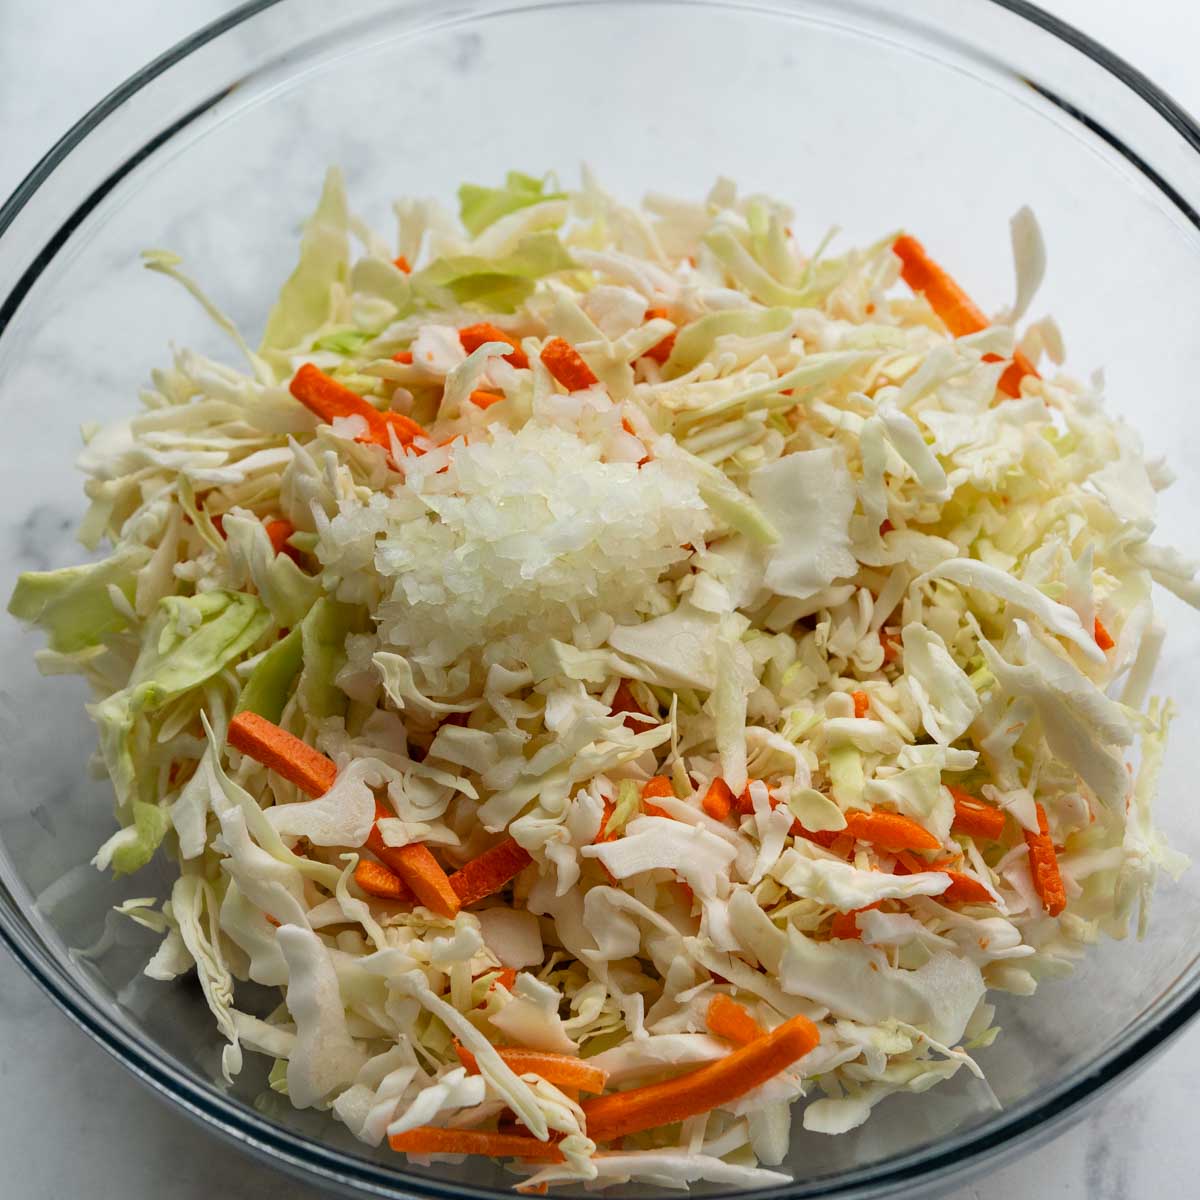 the slaw mix with minced onion.